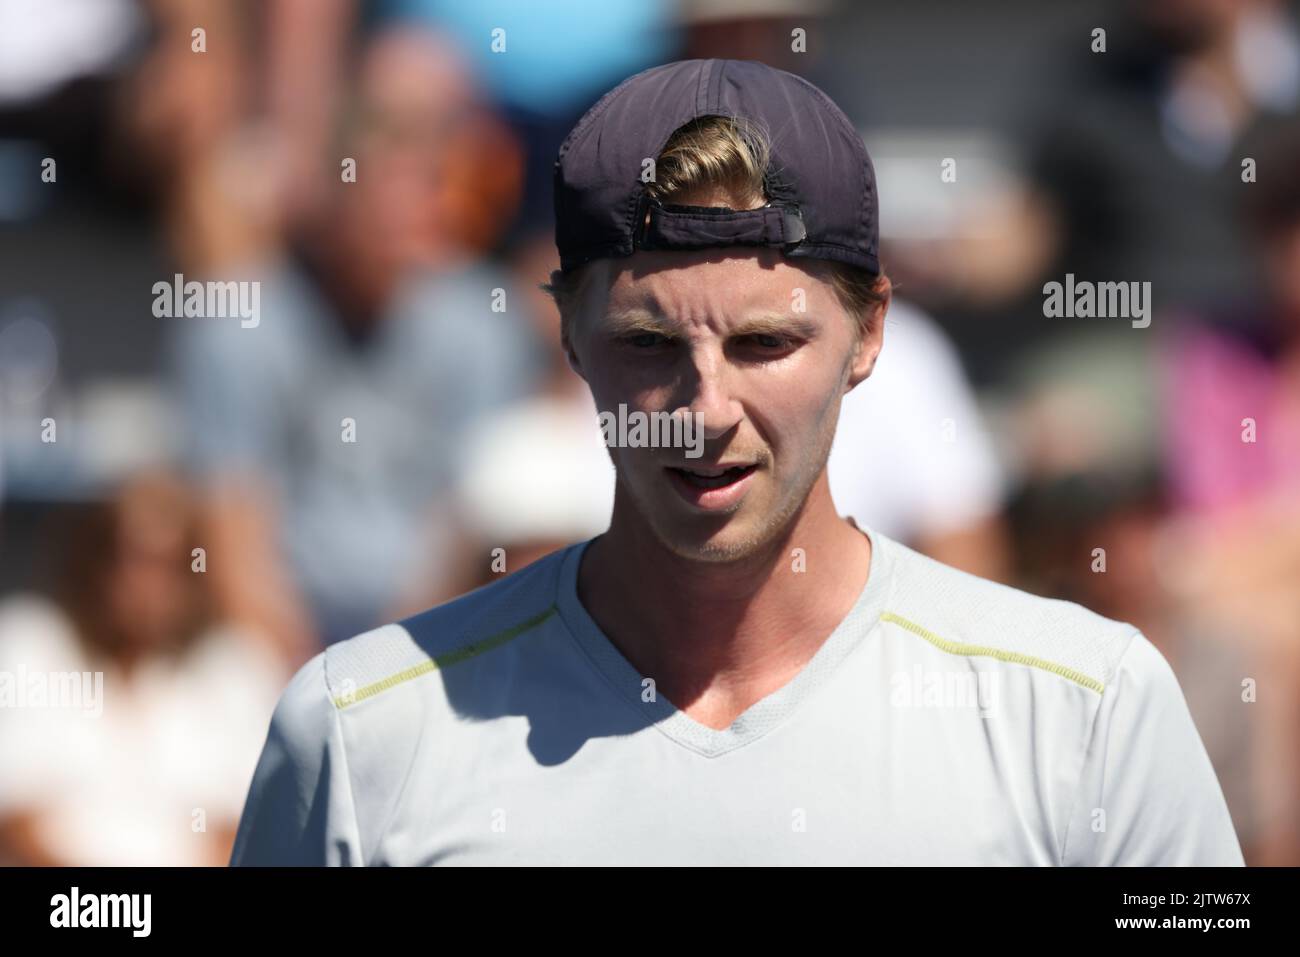 NEW YORK, NY - September 1: Gijs Brouwer of the Netherlands during his match against Lorenzo Musetti of Italy at USTA Billie Jean King National Tennis Center on September 1, 2022 in New York City. (Photo by Adam Stoltman/BSR Agency) Credit: BSR Agency/Alamy Live News Stock Photo